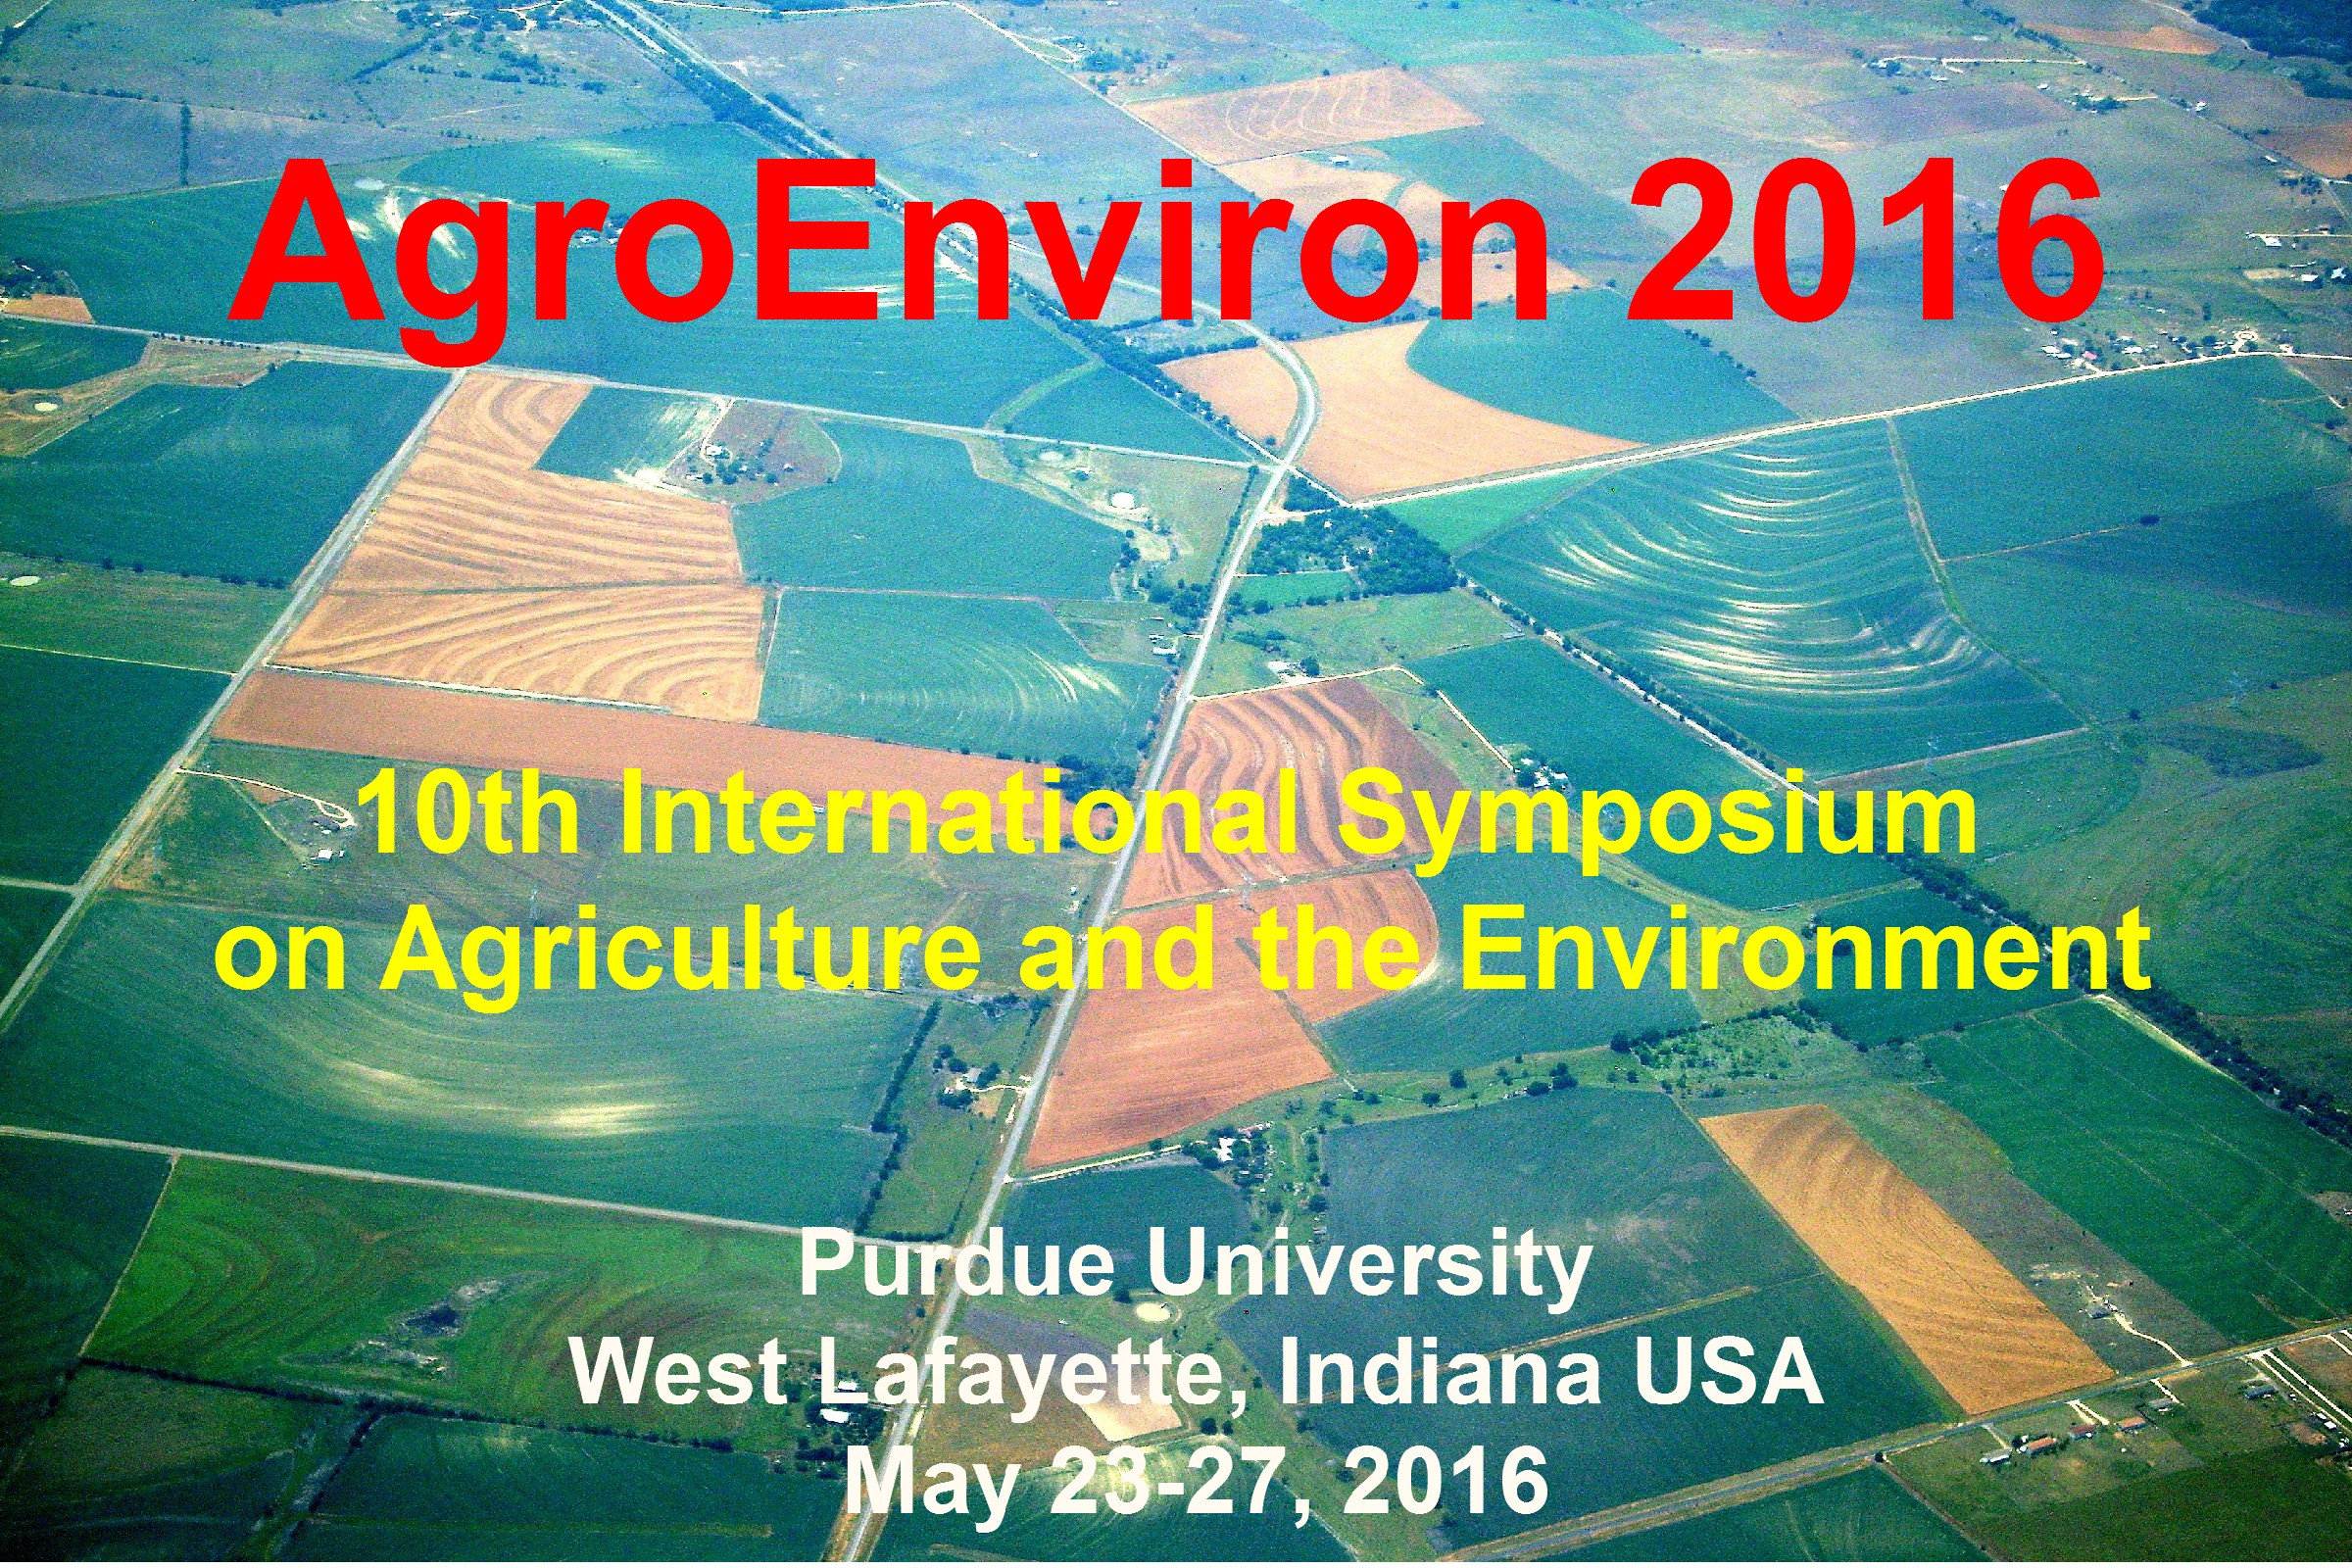 10th International Symposium on Agriculture and the Environment abstracts